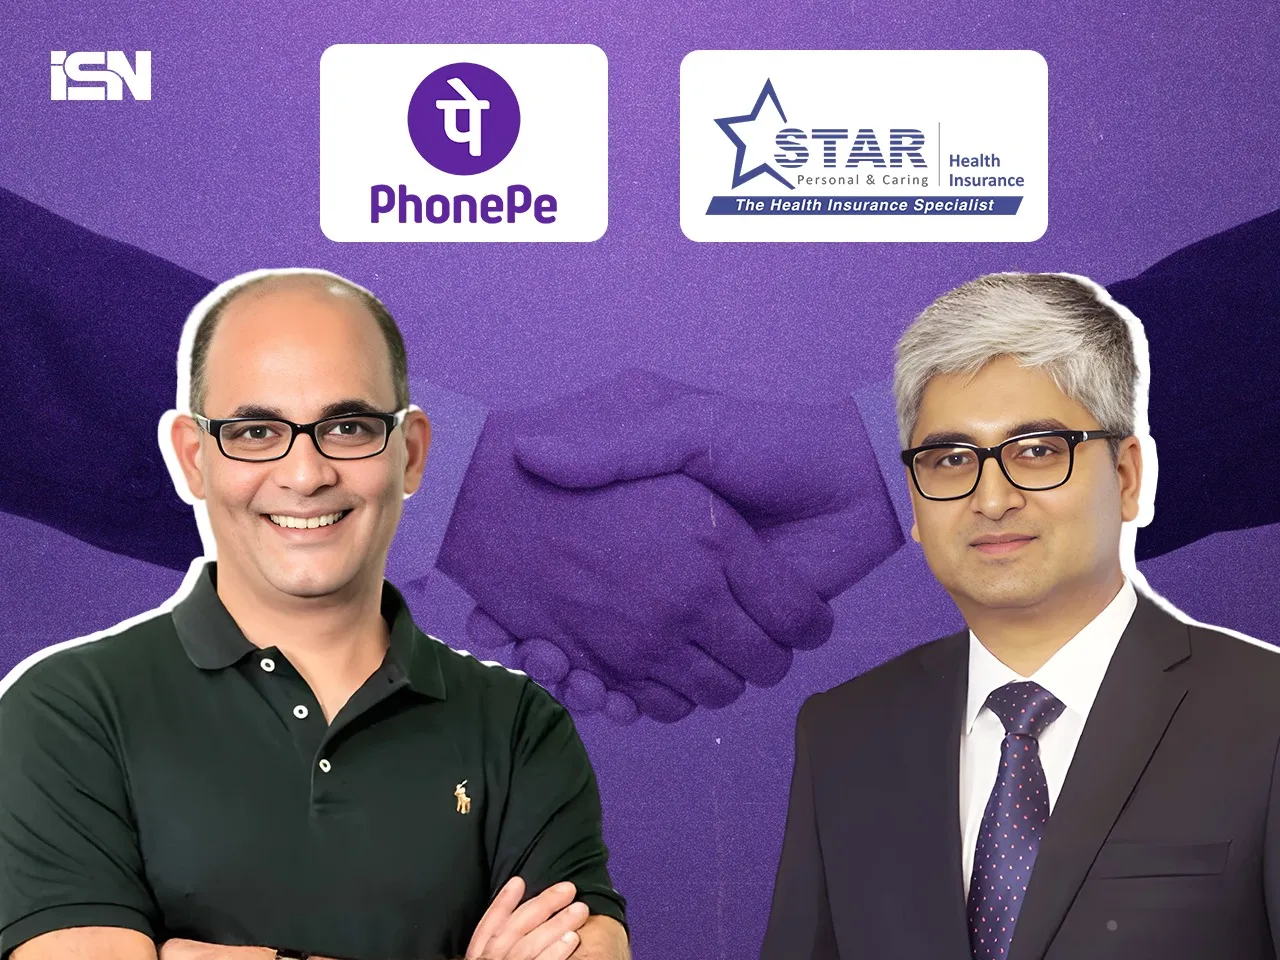 PhonePe joins hands with Star Health Insurance